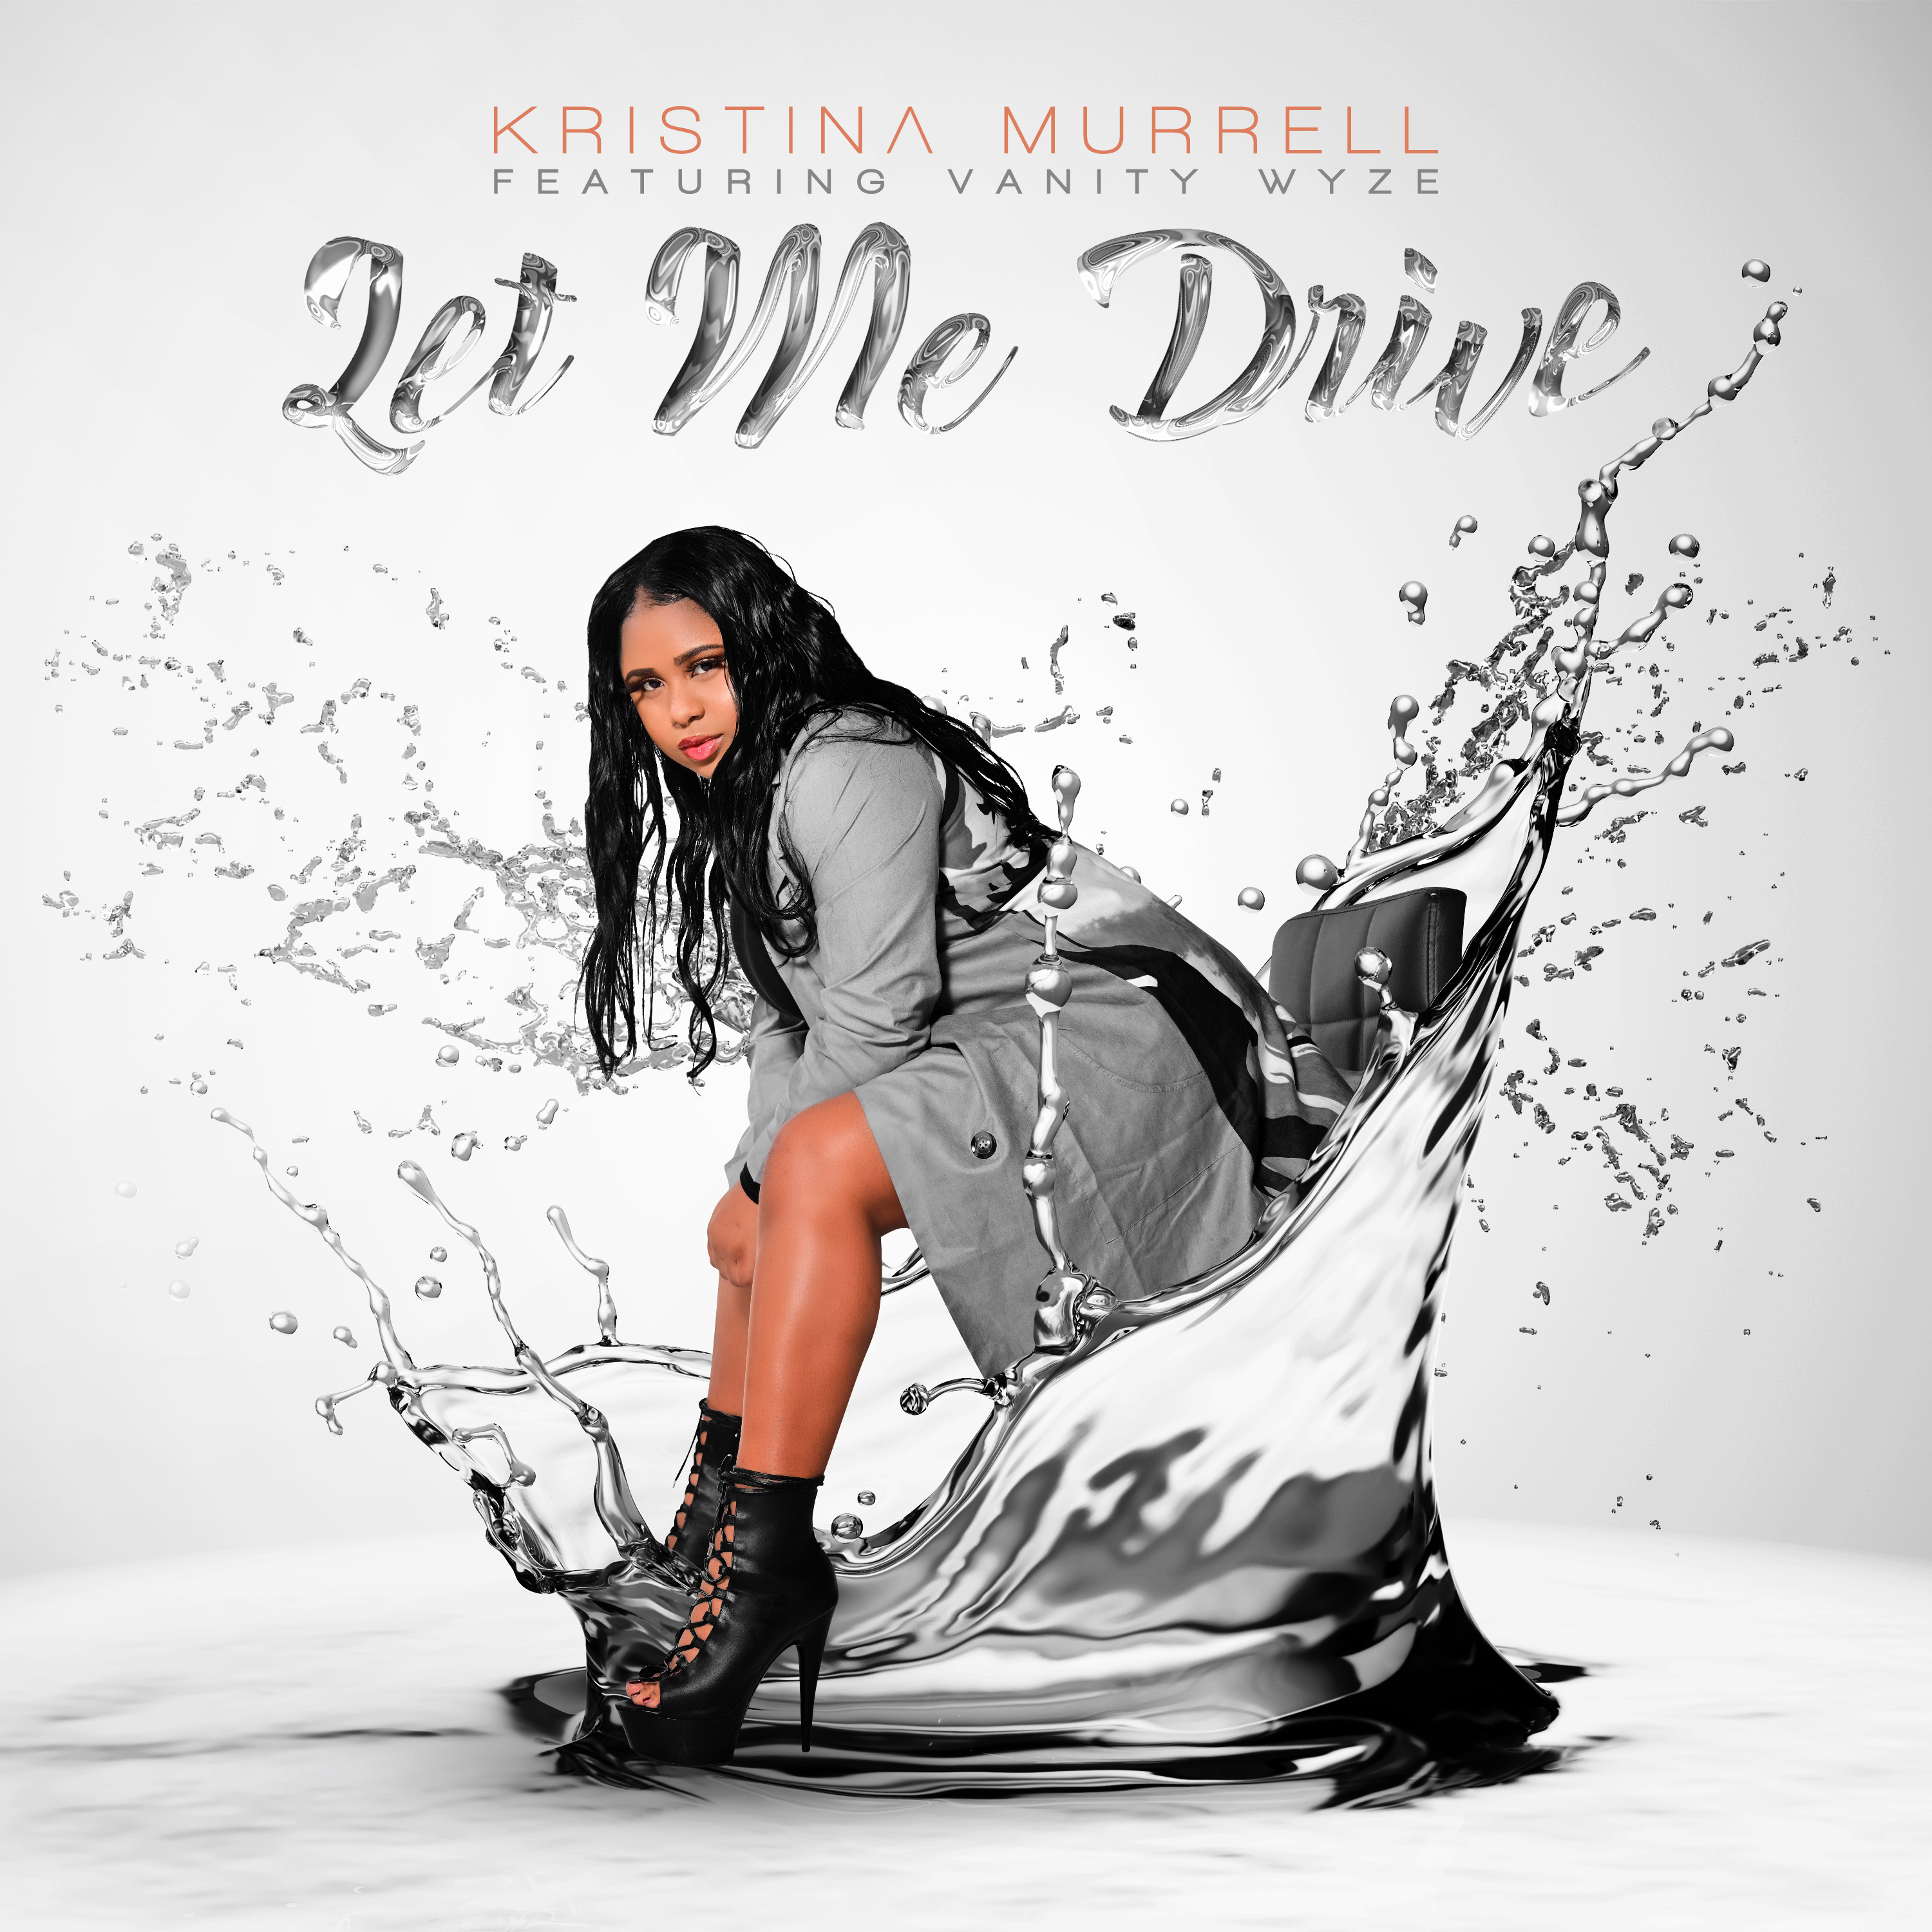 Adorned with plenty of 90s nostalgia, ‘Kristina Murrell’ releases new single ‘Let Me drive’